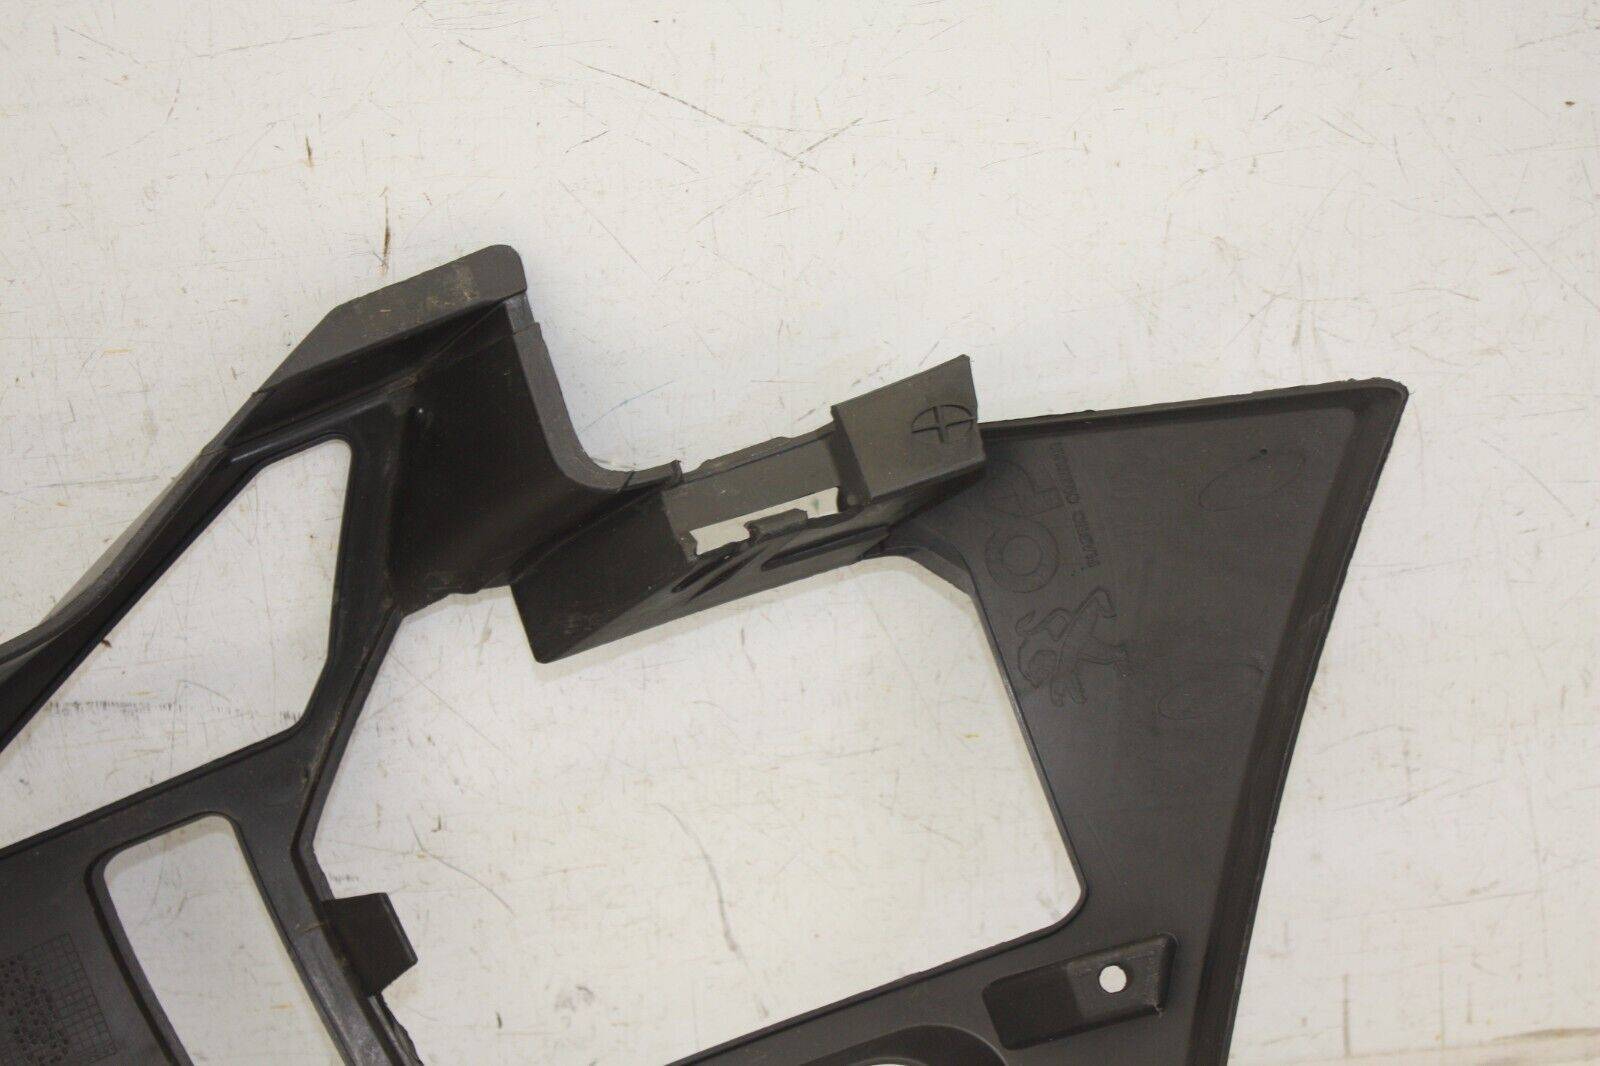 Peugeot-3008-Front-Bumper-Right-Side-Bracket-2017-TO-2021-9815337580-Genuine-176385381019-10